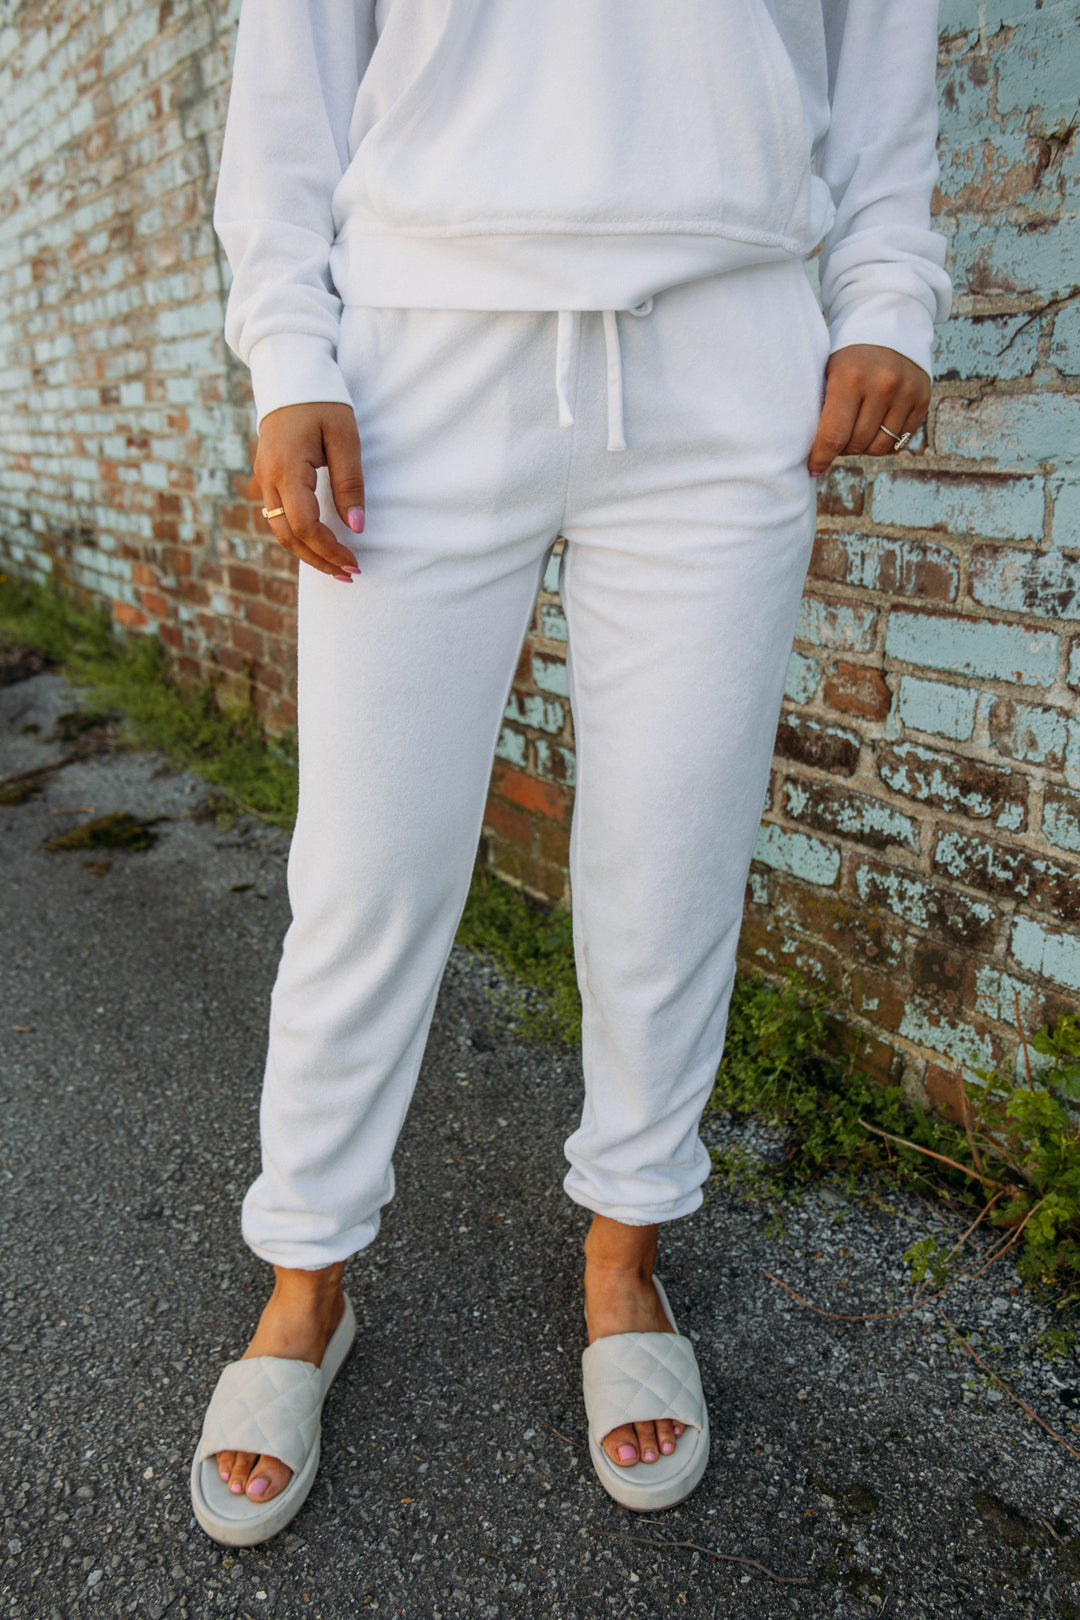 Made from our sumptuous terry blend fabric, this comfort-driven style works both as a beach essential and for everyday wear. Elasticated rib waistband with drawcord and elastic cuffs ensure a comfortable fit. Complete the look with our CozyTerry Dolman Pullover or Cross Over Hoodie.